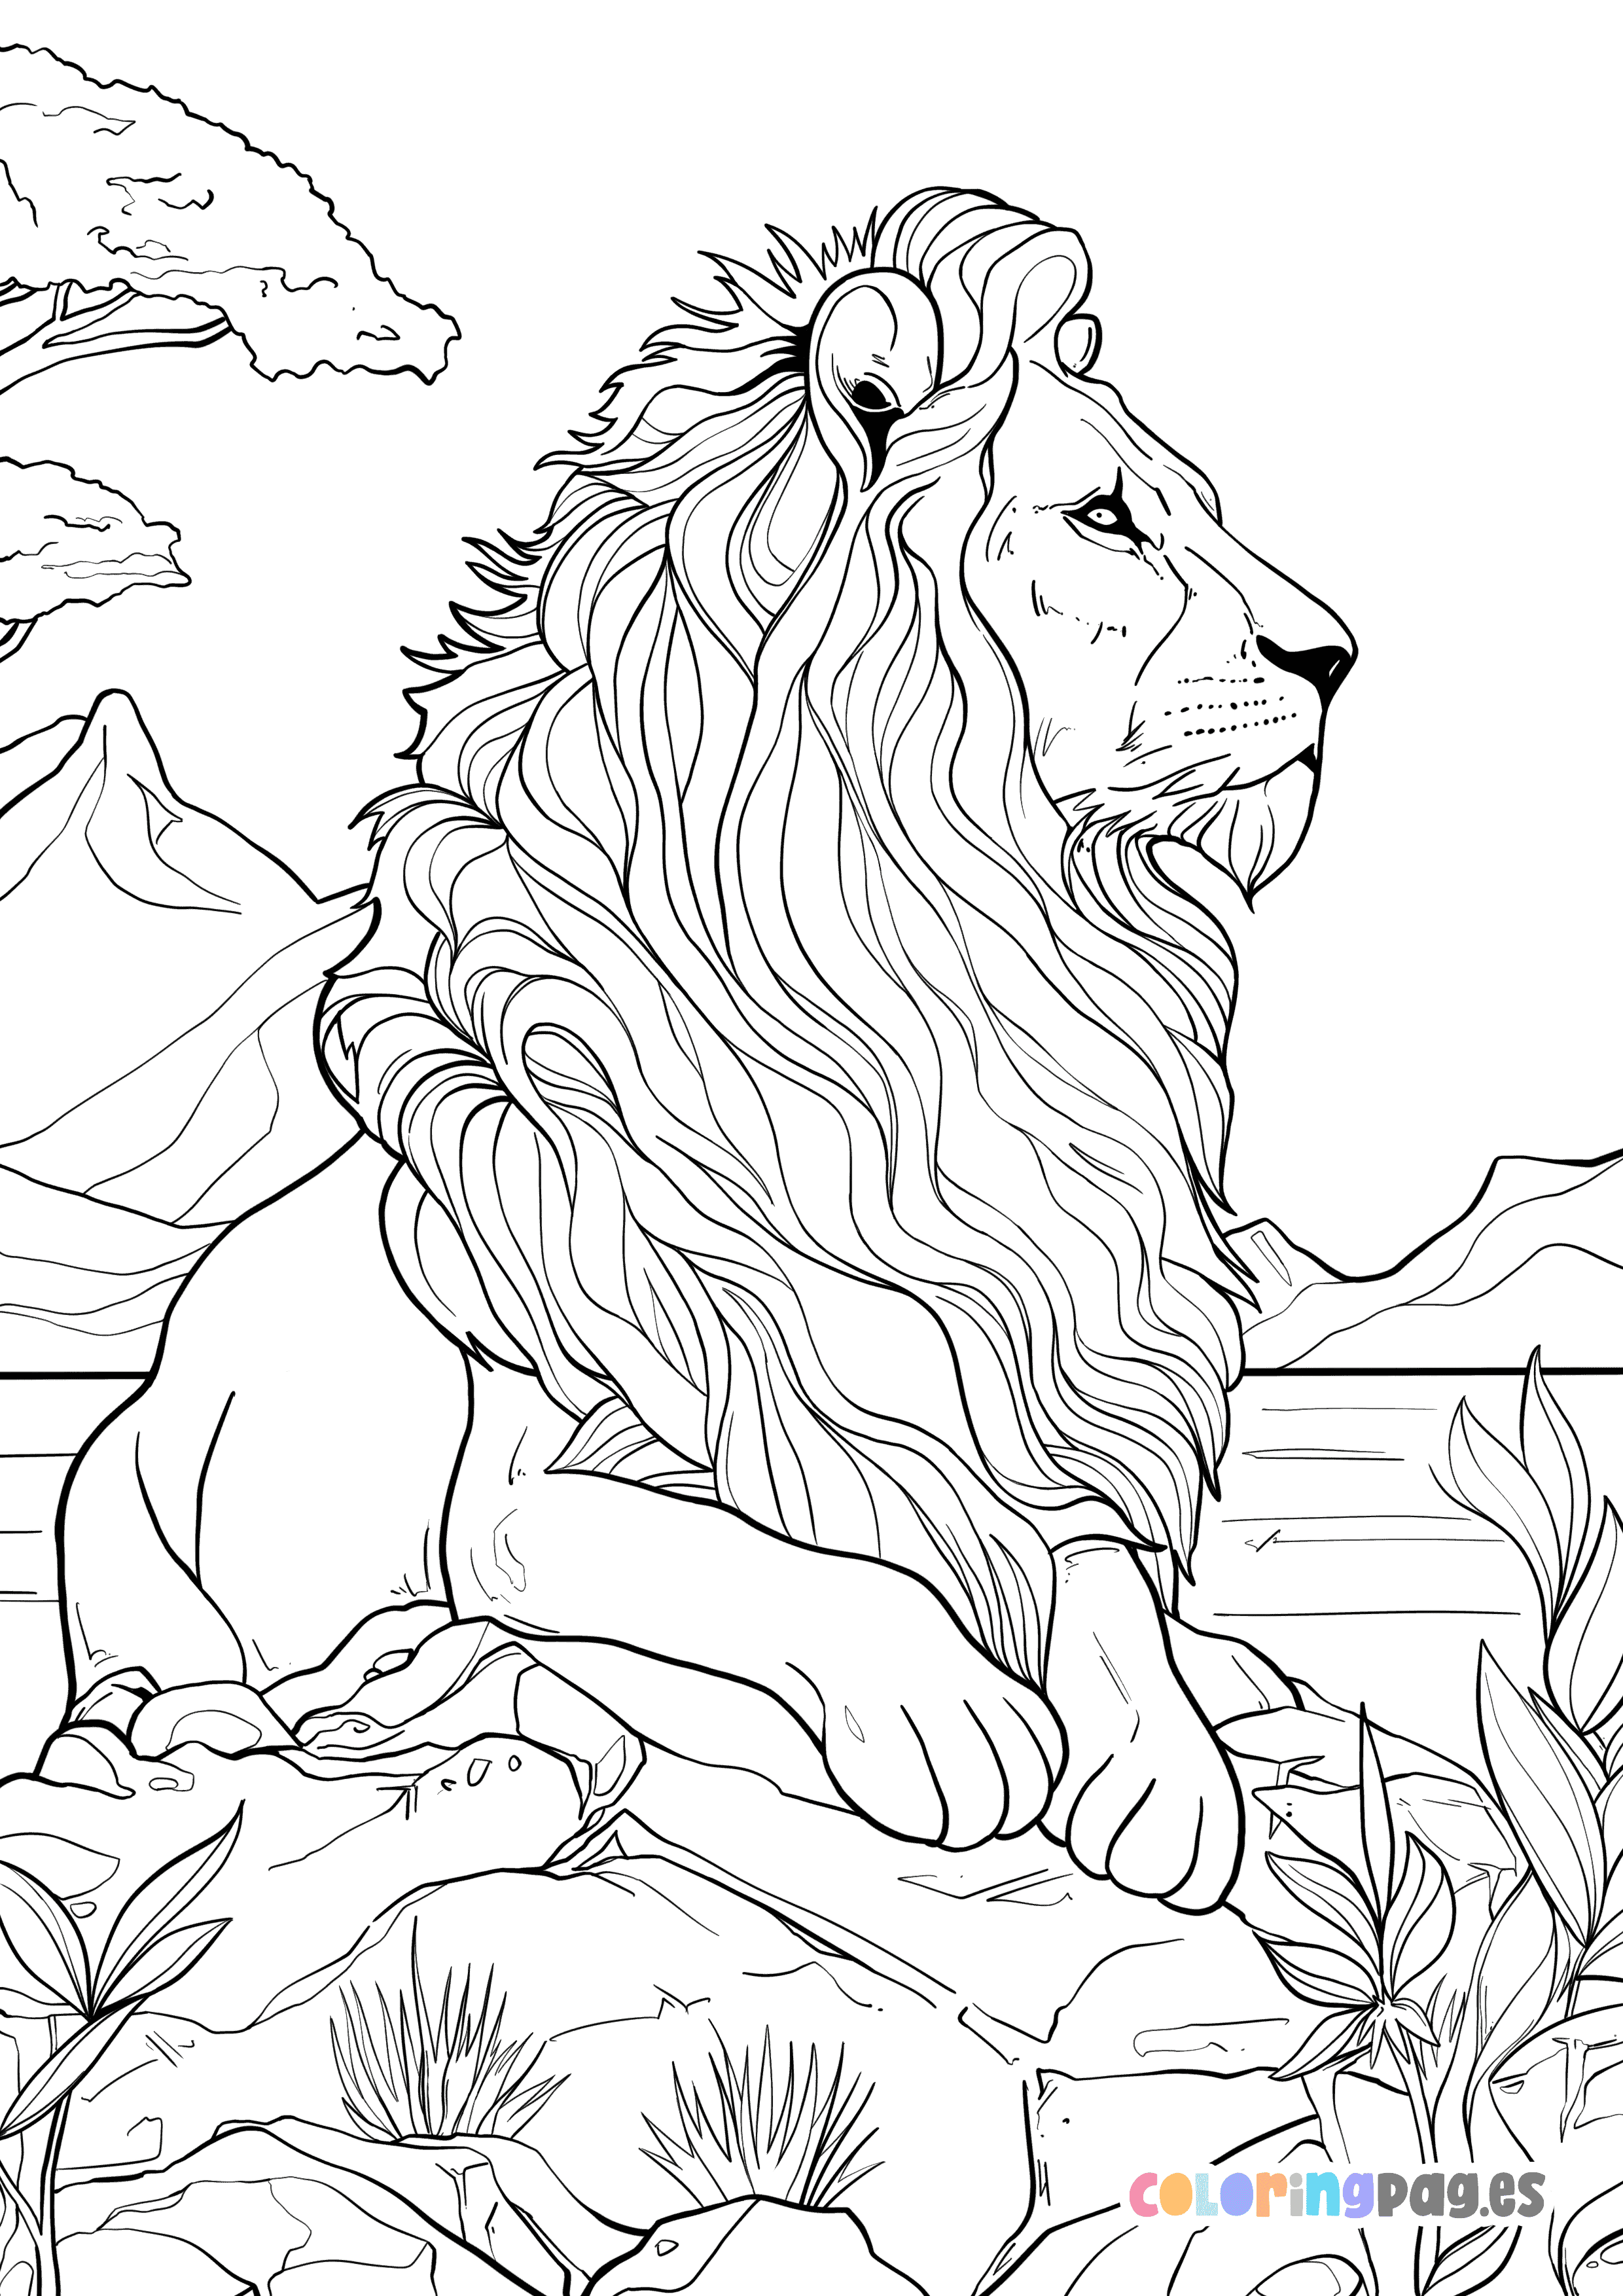 A proud lion sitting on a rock coloring page